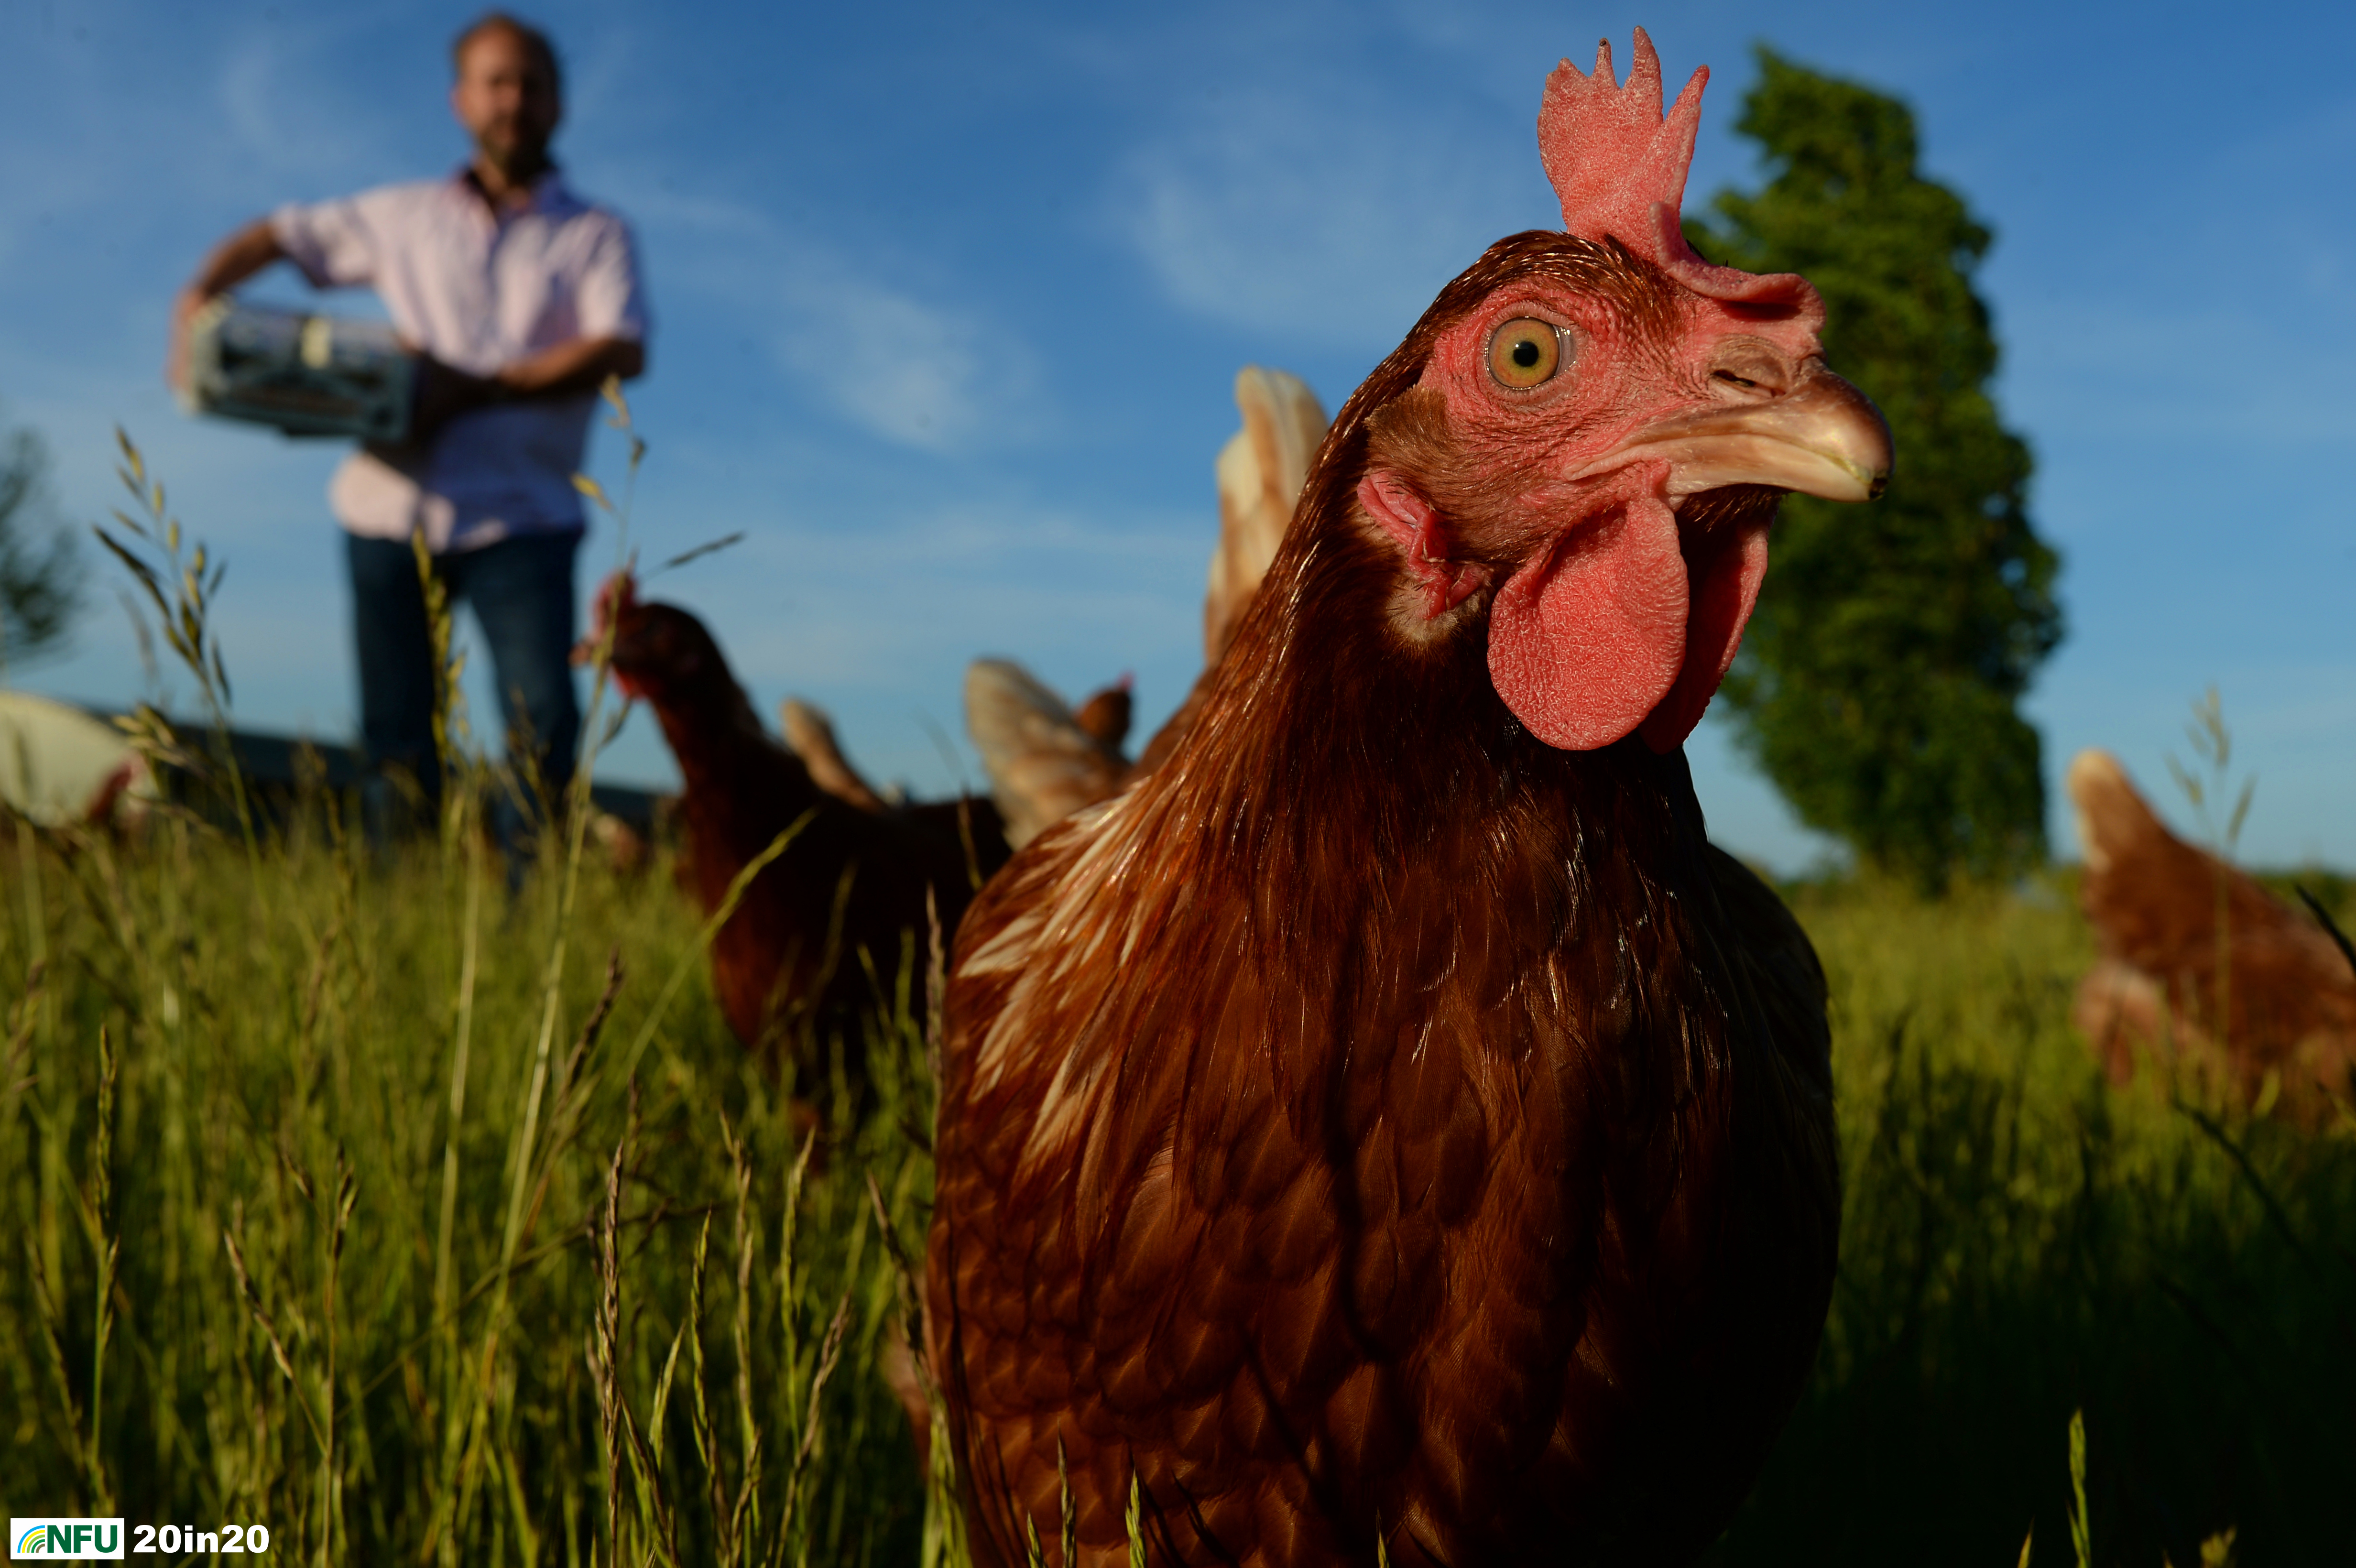 <h4>Free range chickens with farmer Toby Rush</h4><p>Free range chickens with farmer Tony Rush at Barnham, taken in May 2020. The farm produces around 10 million free range eggs every year. Photo: Nikon D4 + 24mm F1.8 1/320 @ F10 ISO 125</p><p>Warren’s comments: <em>I wanted to shoot some images of farmer Toby Rush before my planned shot - the free-range hens silhouetted against the setting sun. The hens were just so inquisitive of the camera. The sunset shots were nice but the beady gaze of the hen in this shot just caught everyone’s eye.